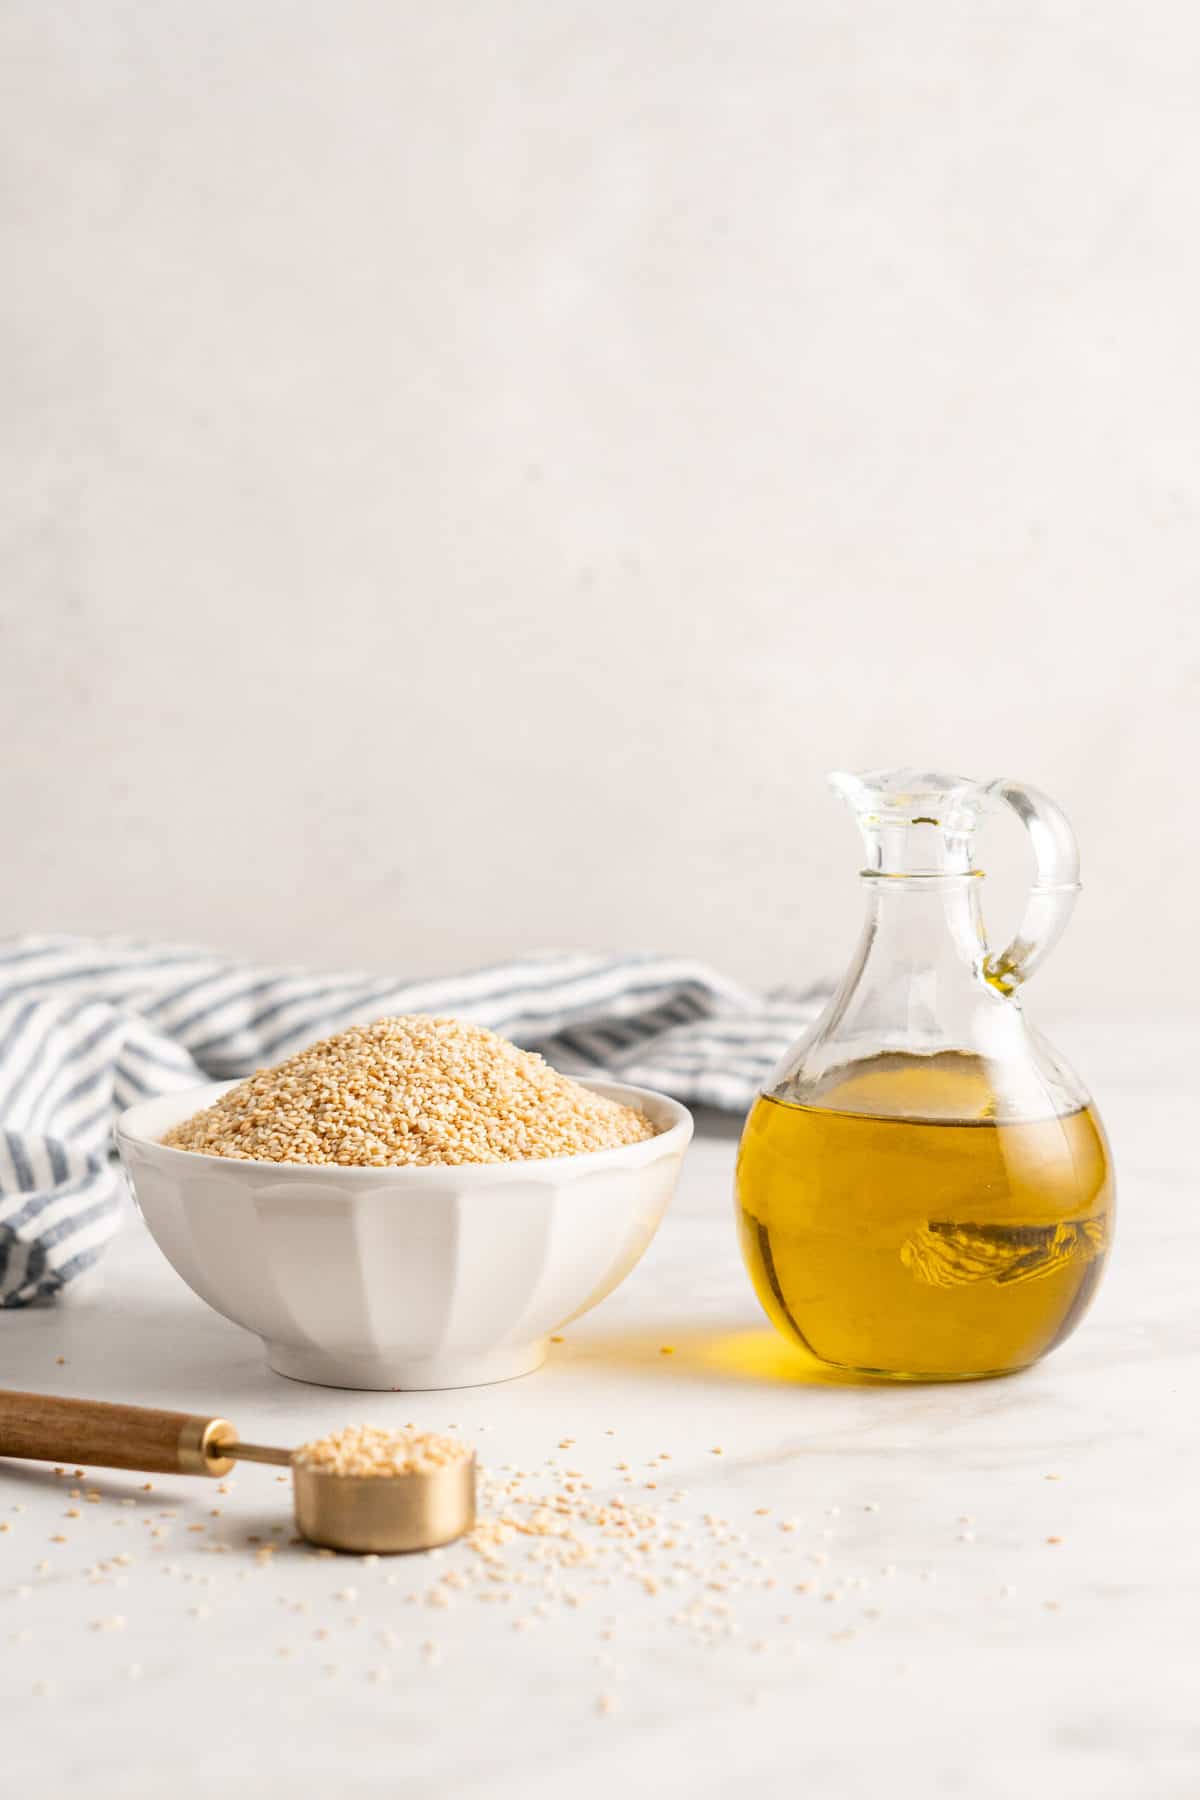 Bowl of sesame seeds and glass pitcher of olive oil